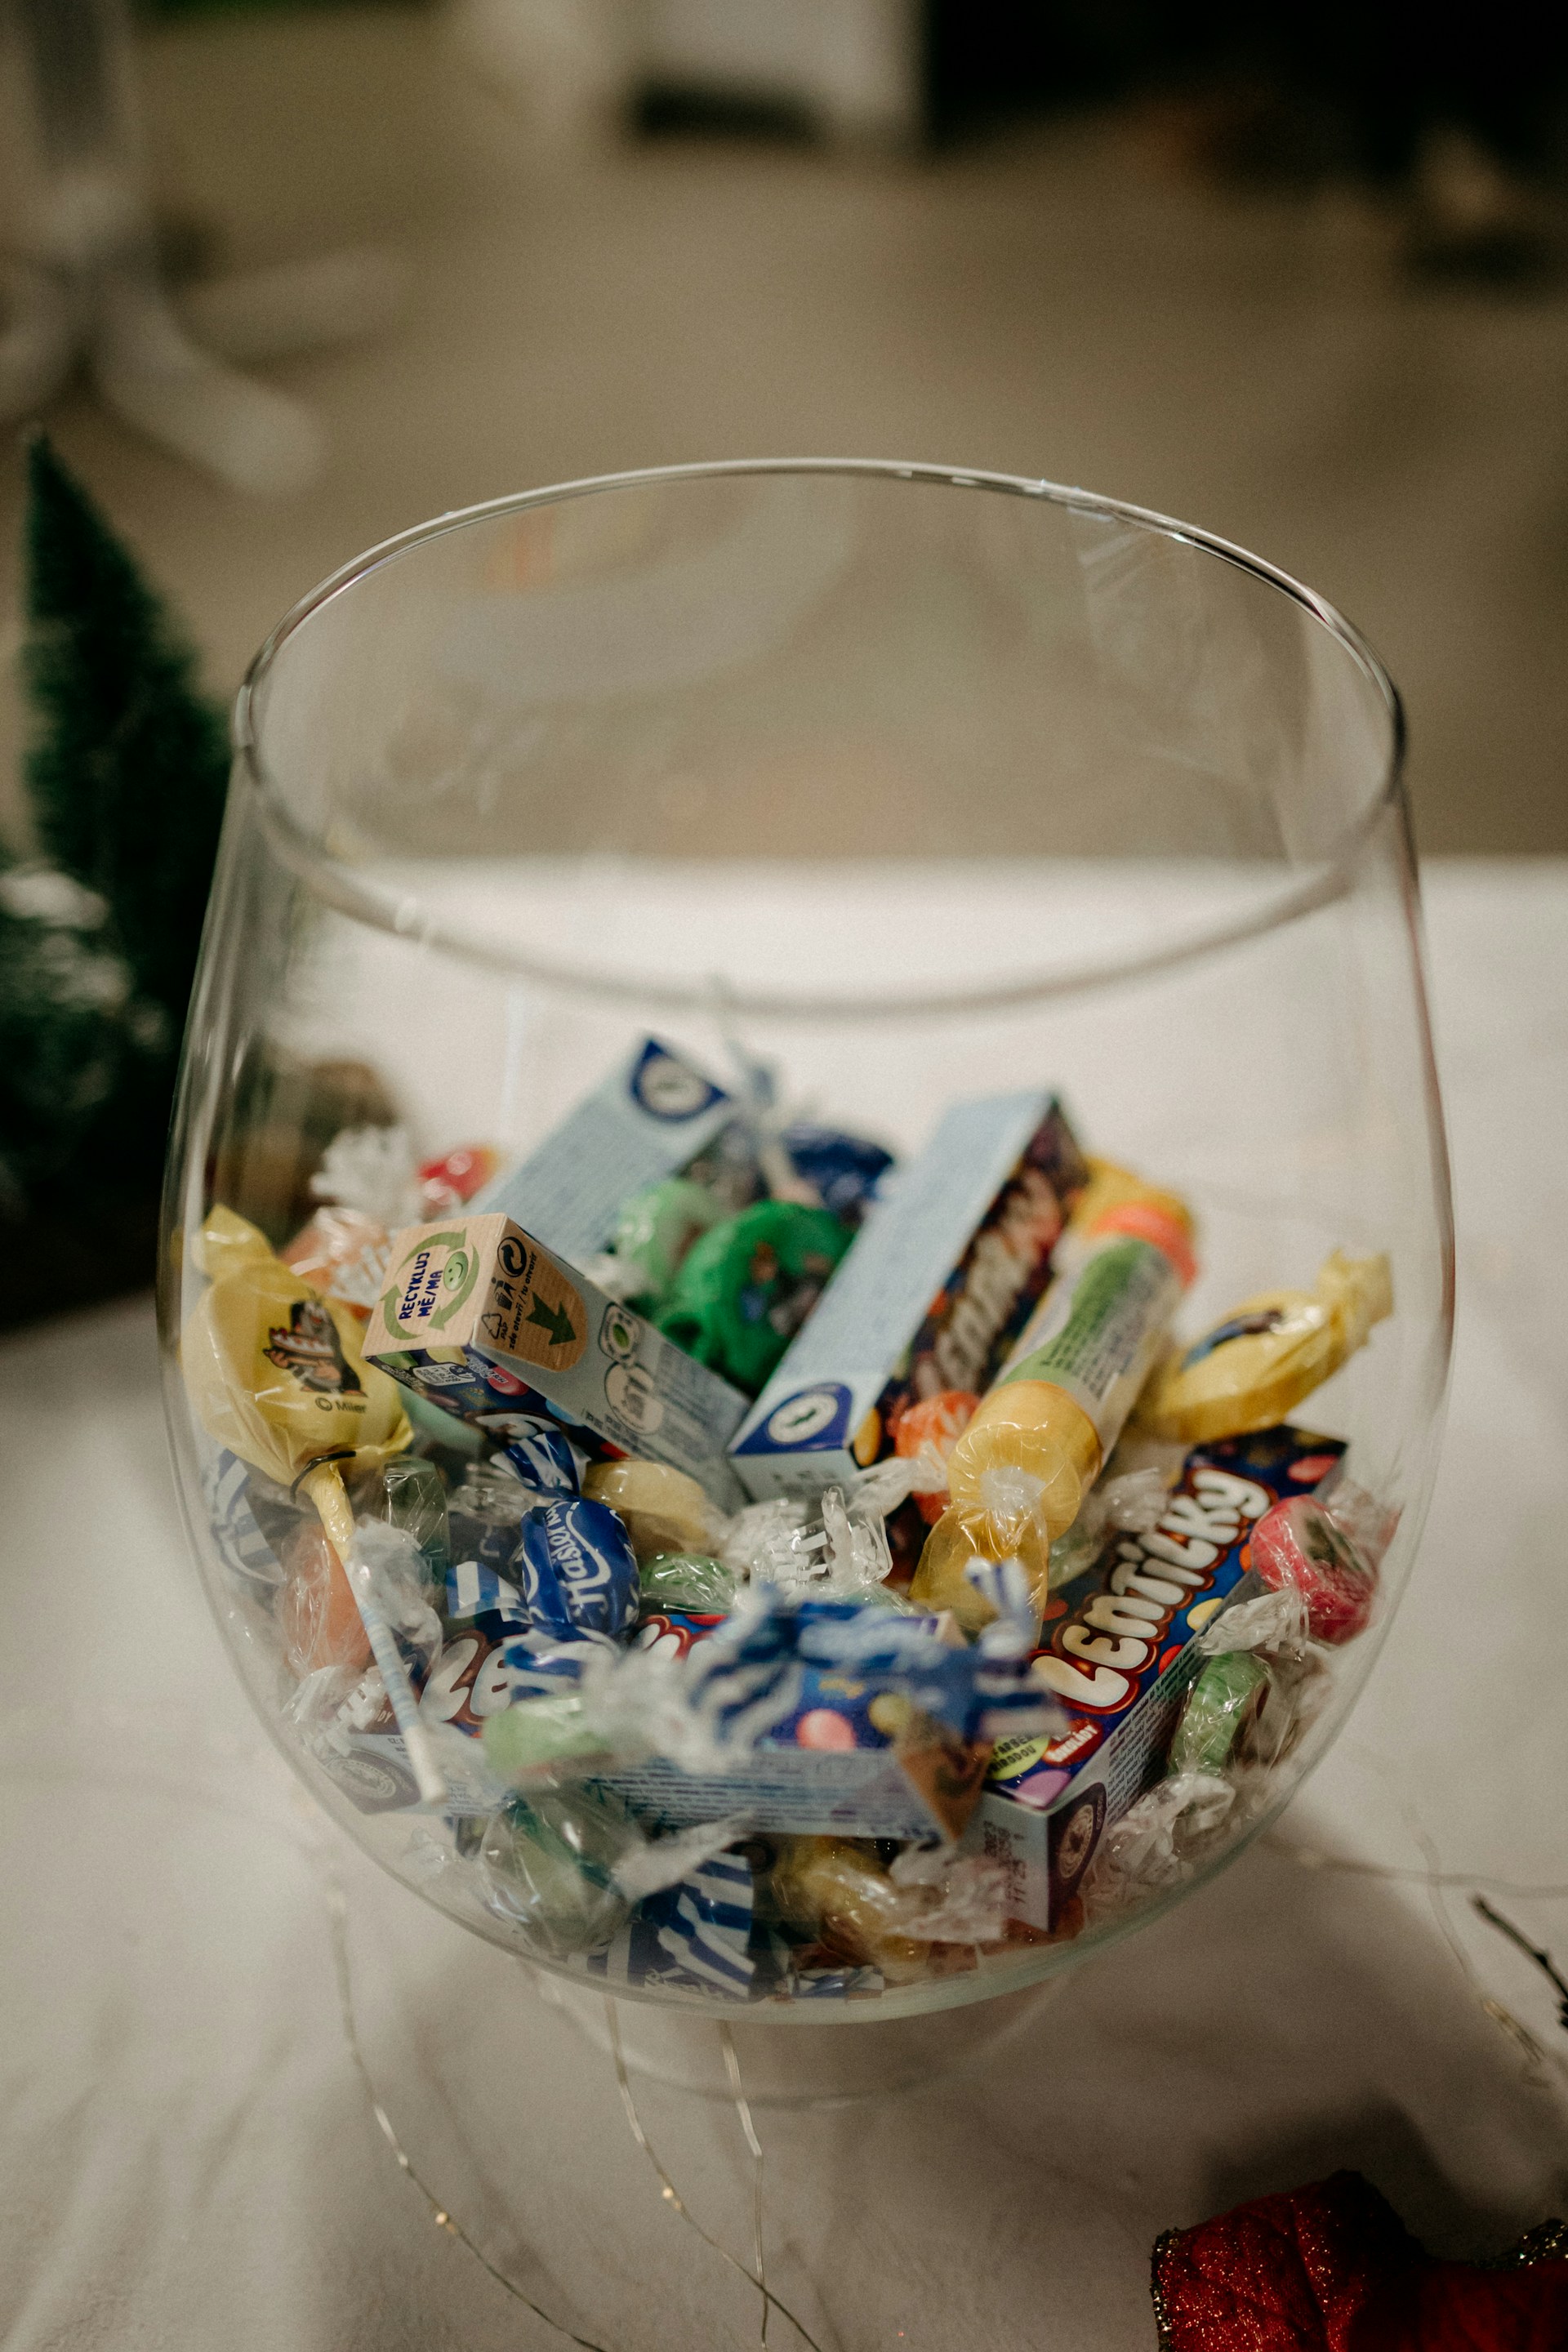 A bowl of candy | Source: Unsplash